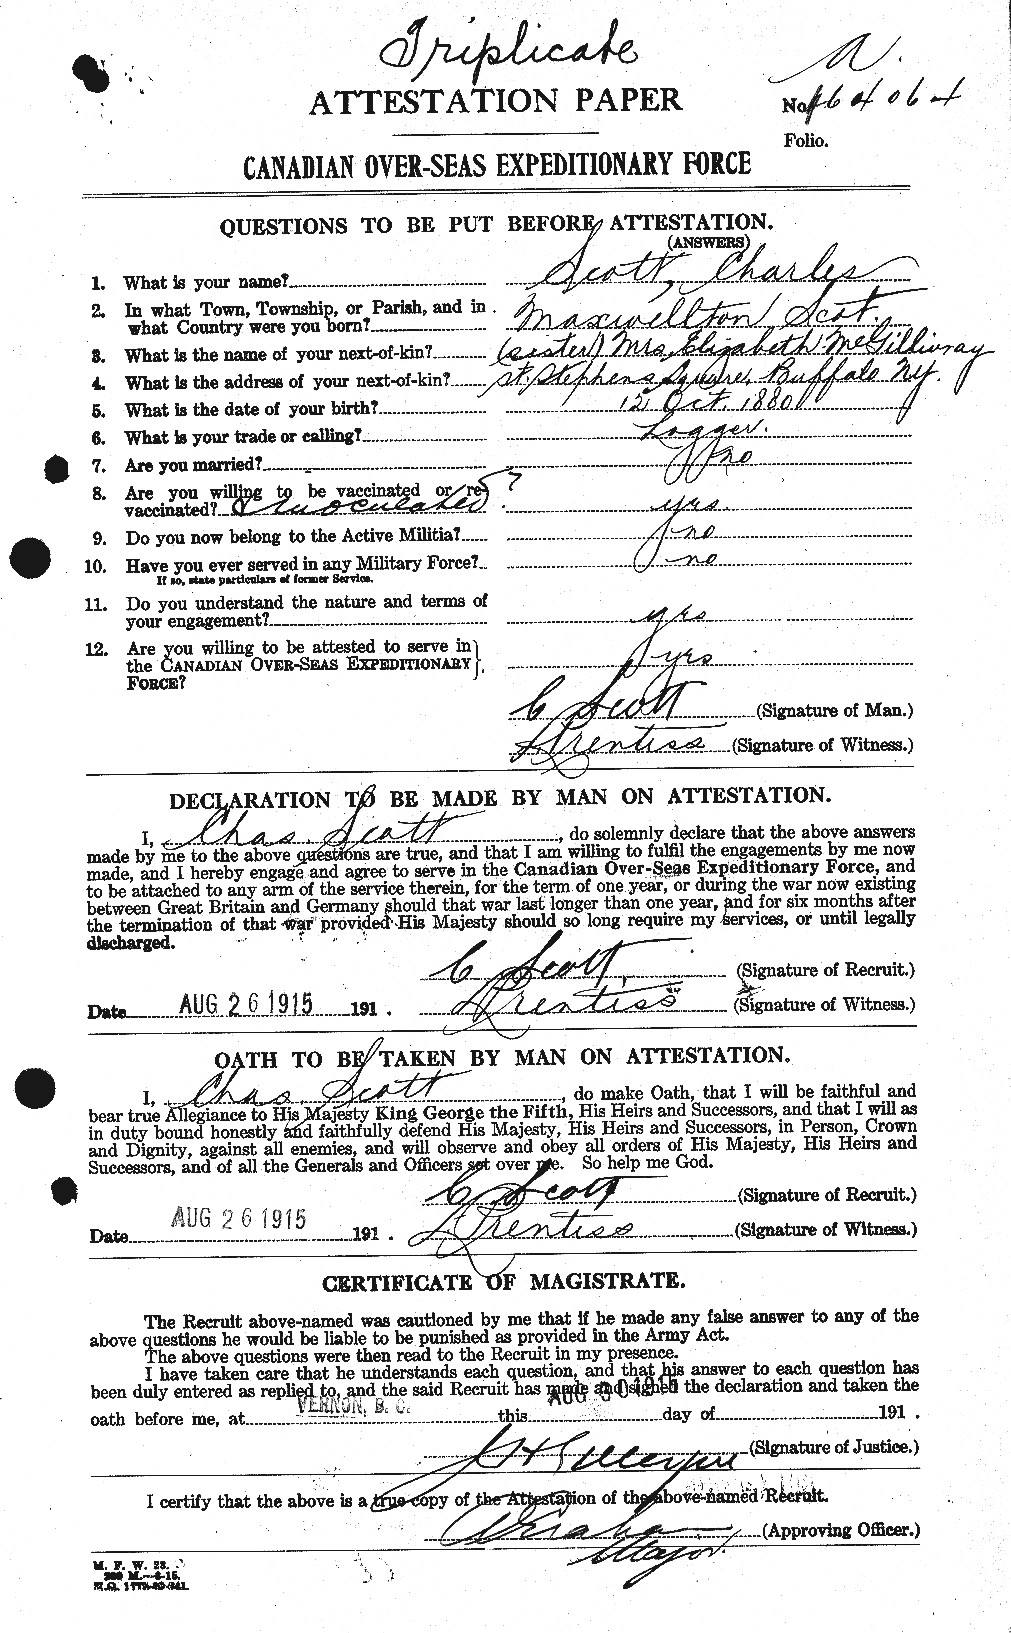 Personnel Records of the First World War - CEF 086189a